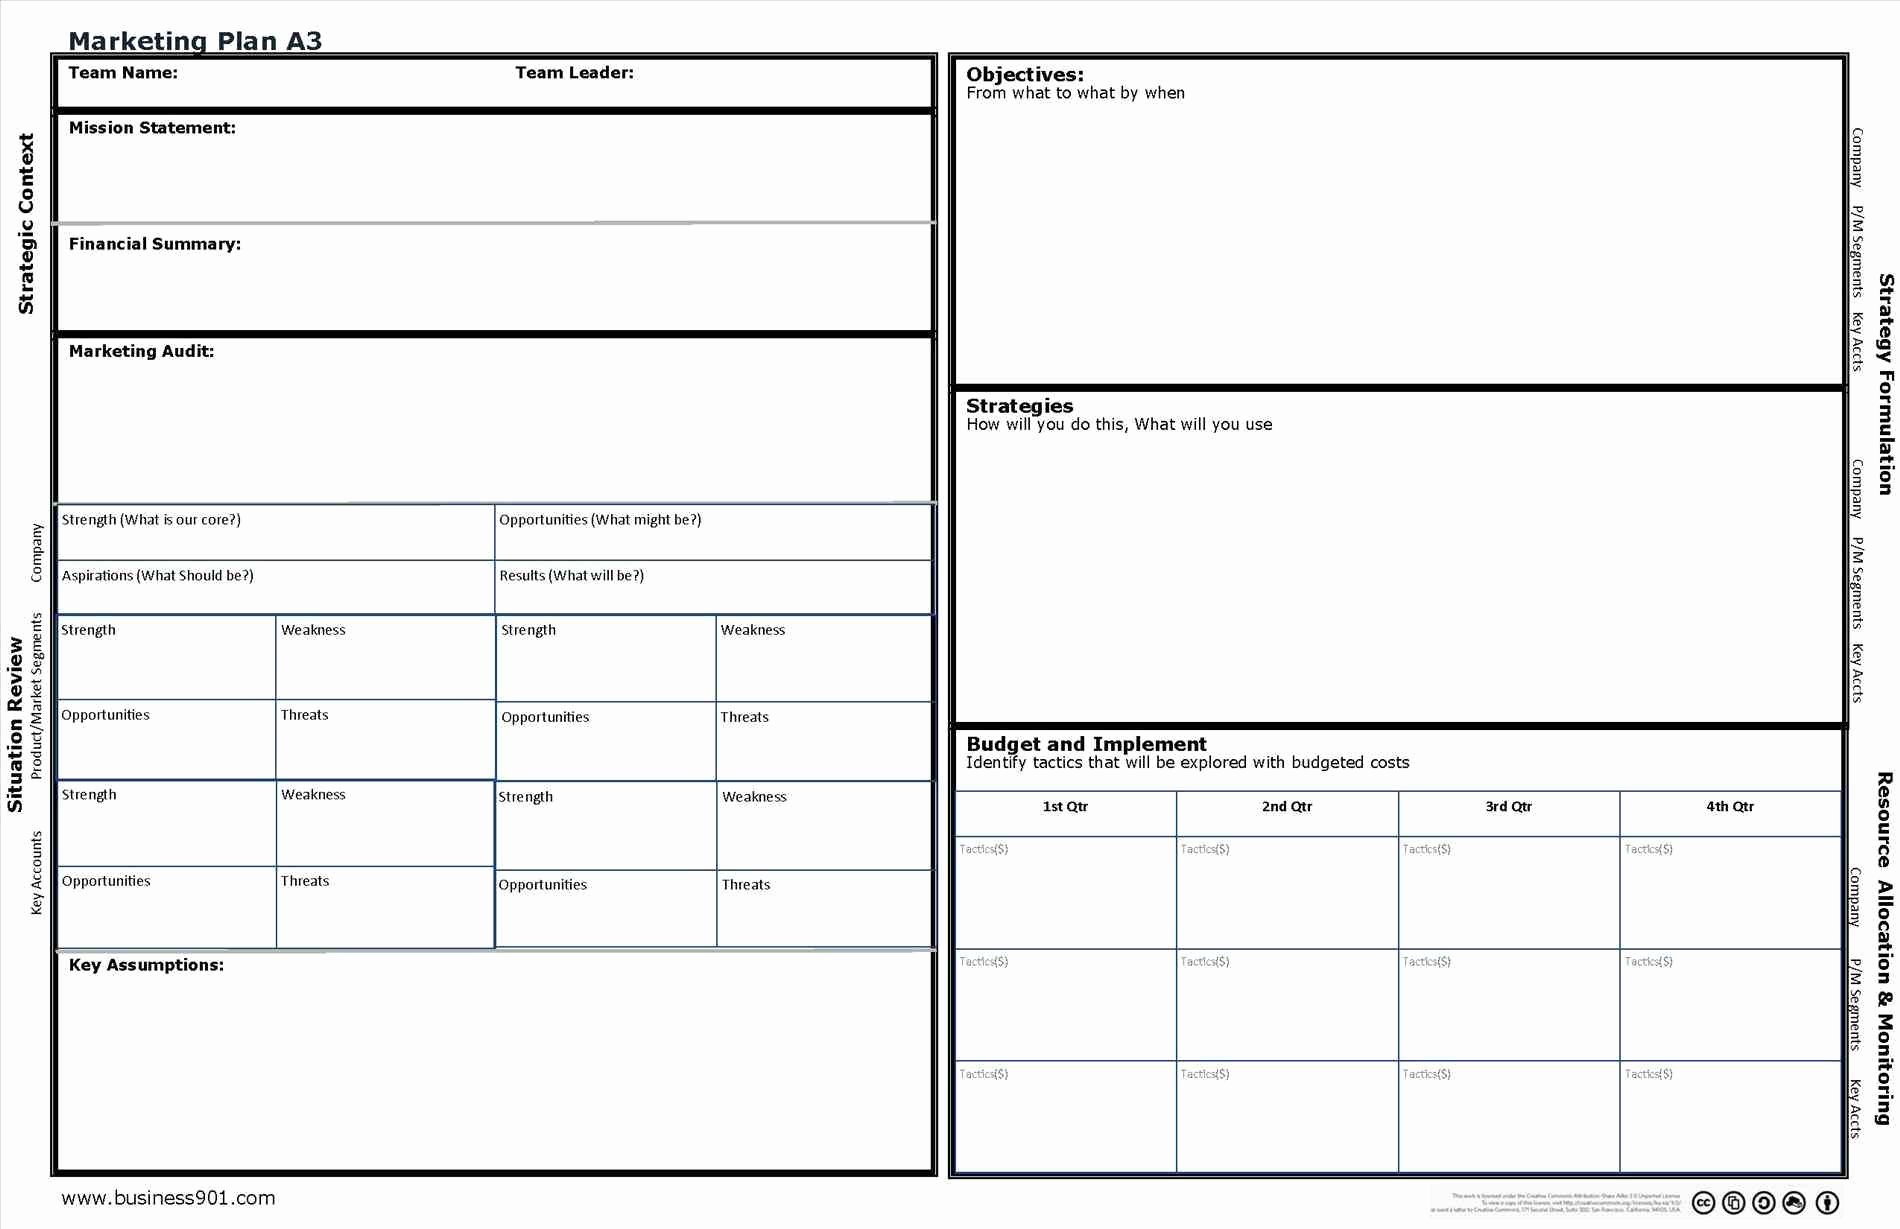 annual sales plan template